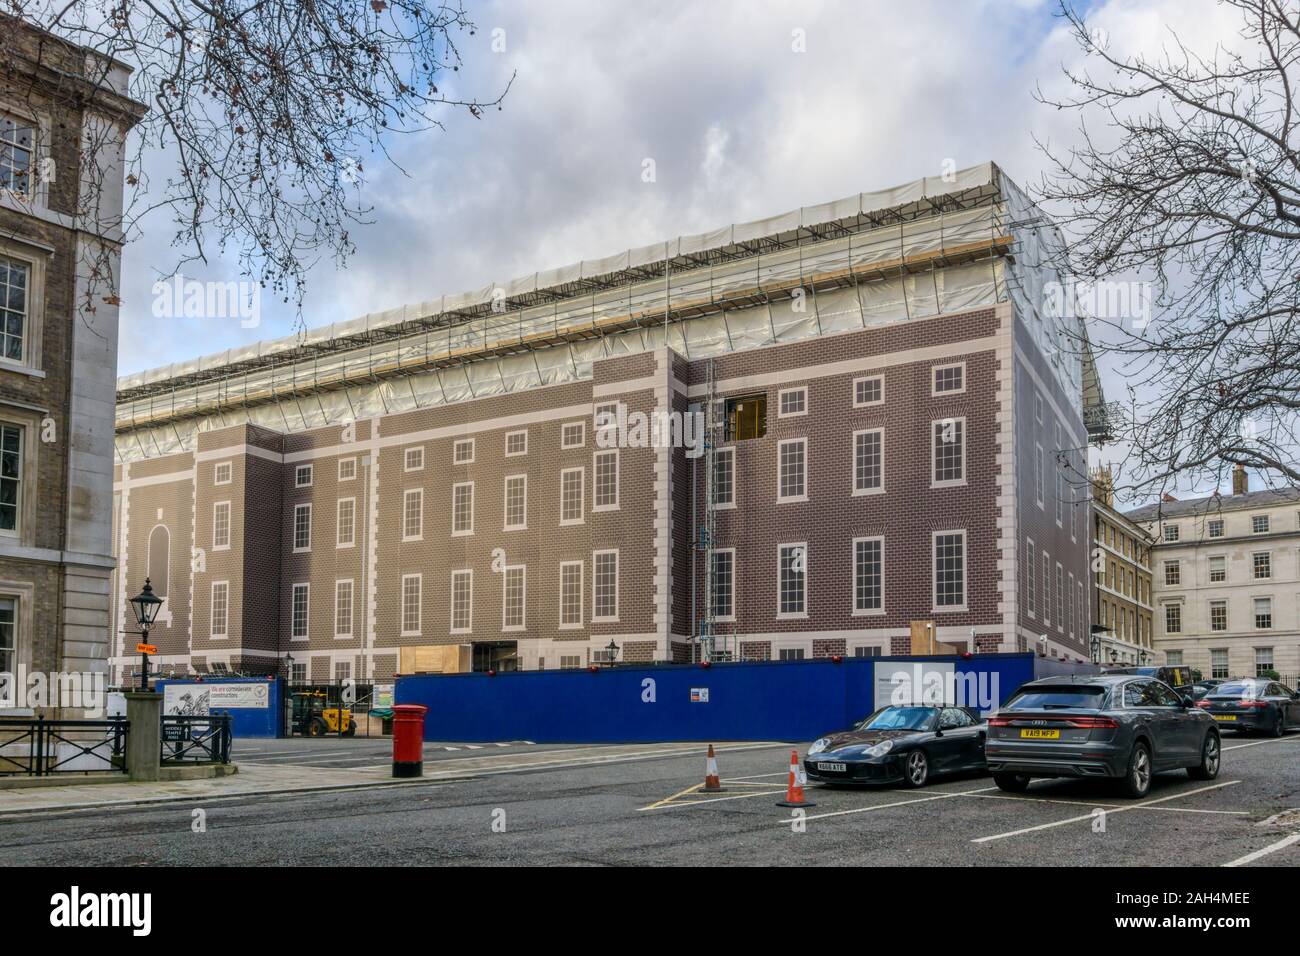 Painted hoarding around scaffolding as part of Project Pegasus - the redevelopment of the Inner Temple in the Inns of Court, London. Stock Photo